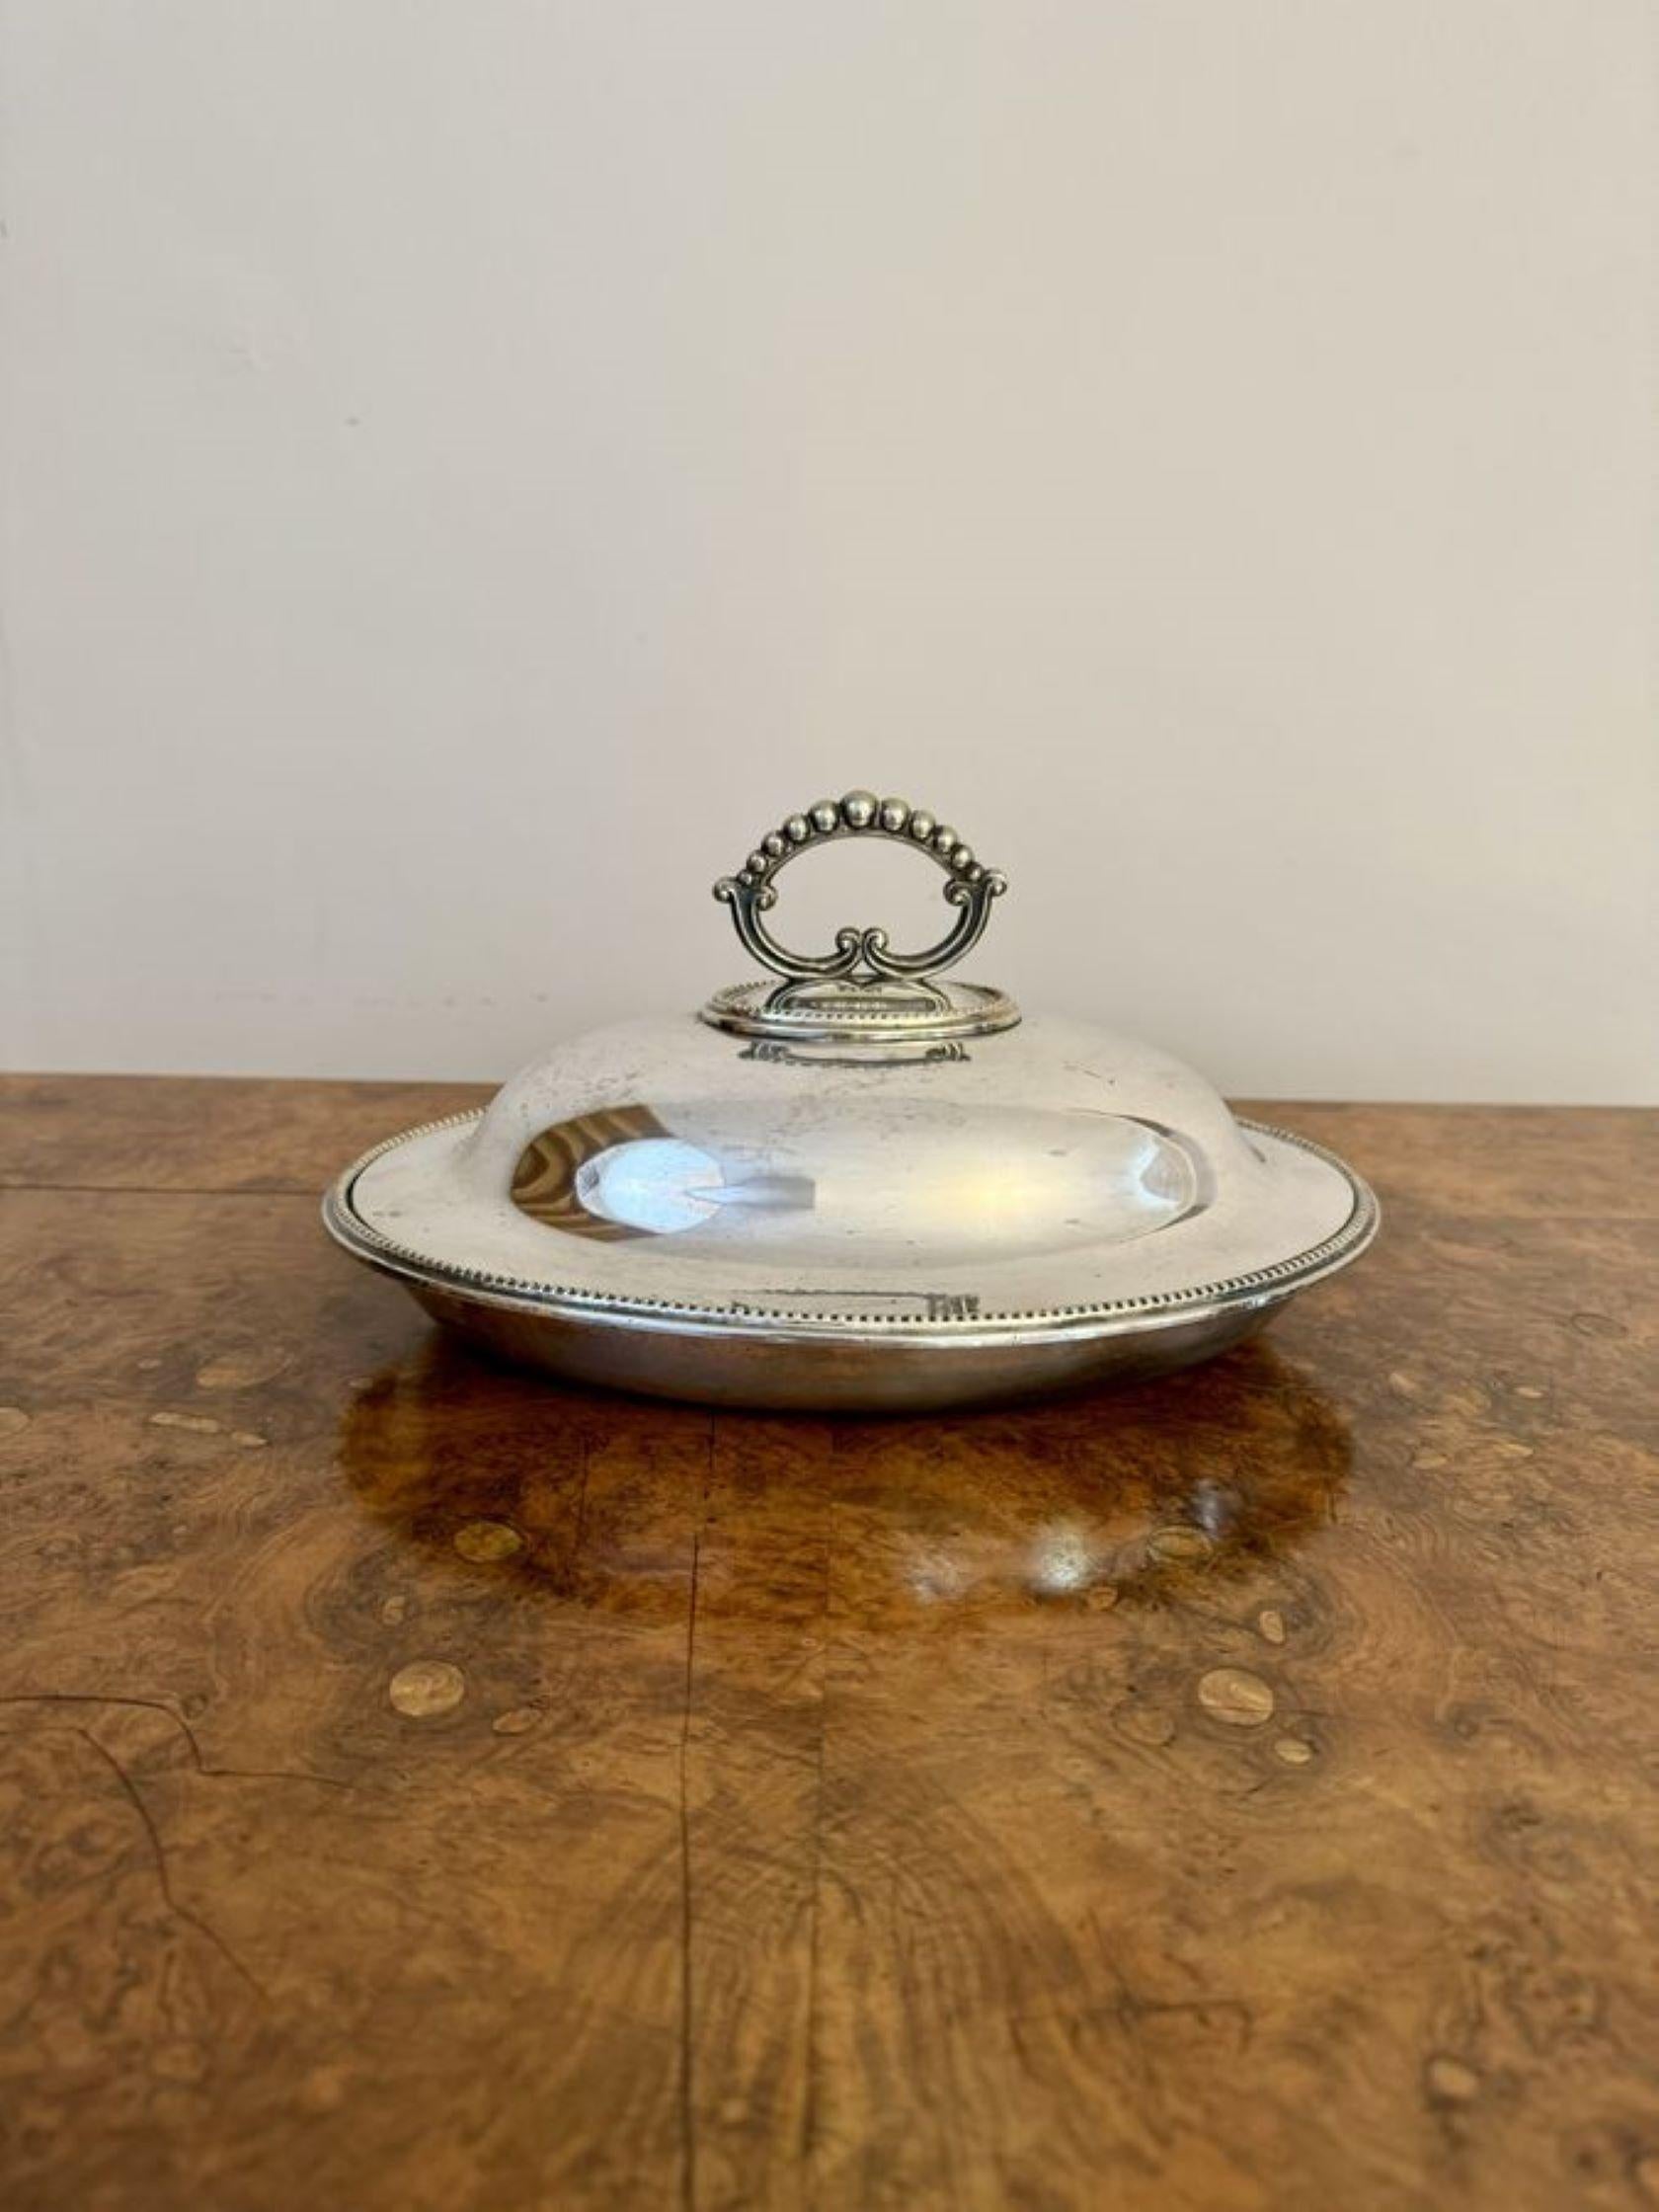 Wonderful quality antique Edwardian silver plated entree dish, having a quality silver plated entree dish with a removable lid and a ornate silver plated handle to the top.

D. 1900